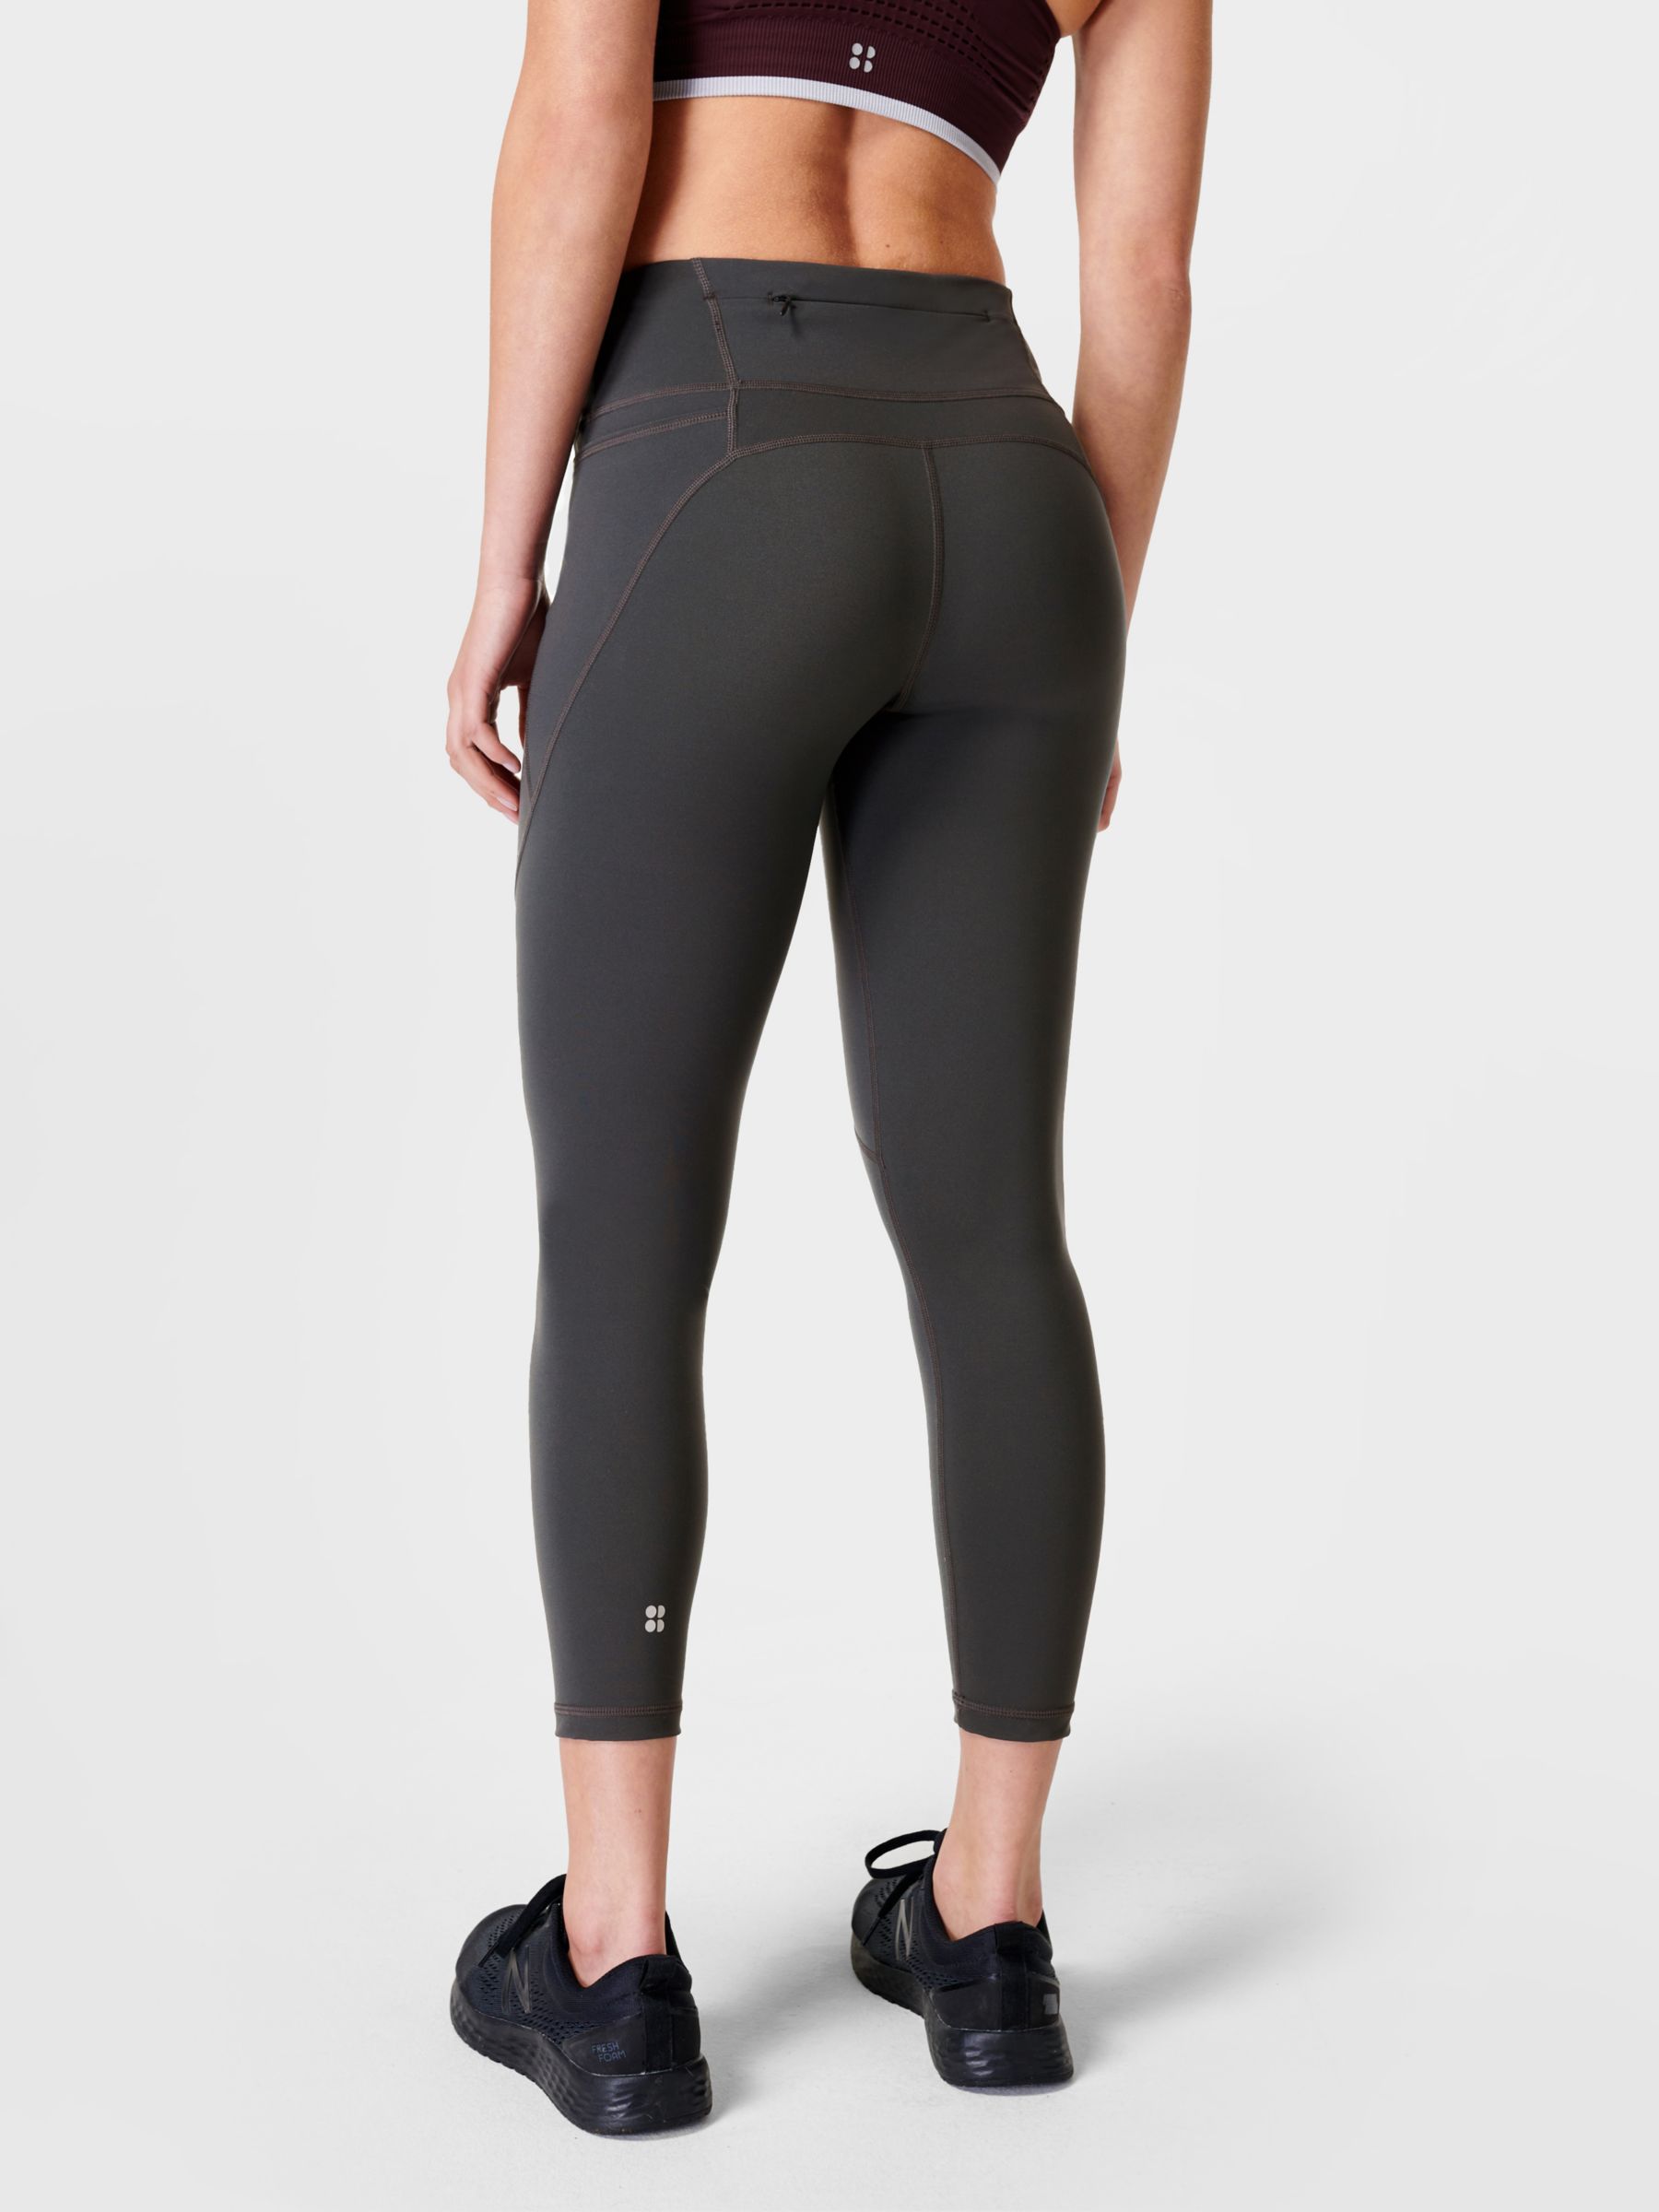 Sweaty Betty sale: Up to 70% off select workout gear